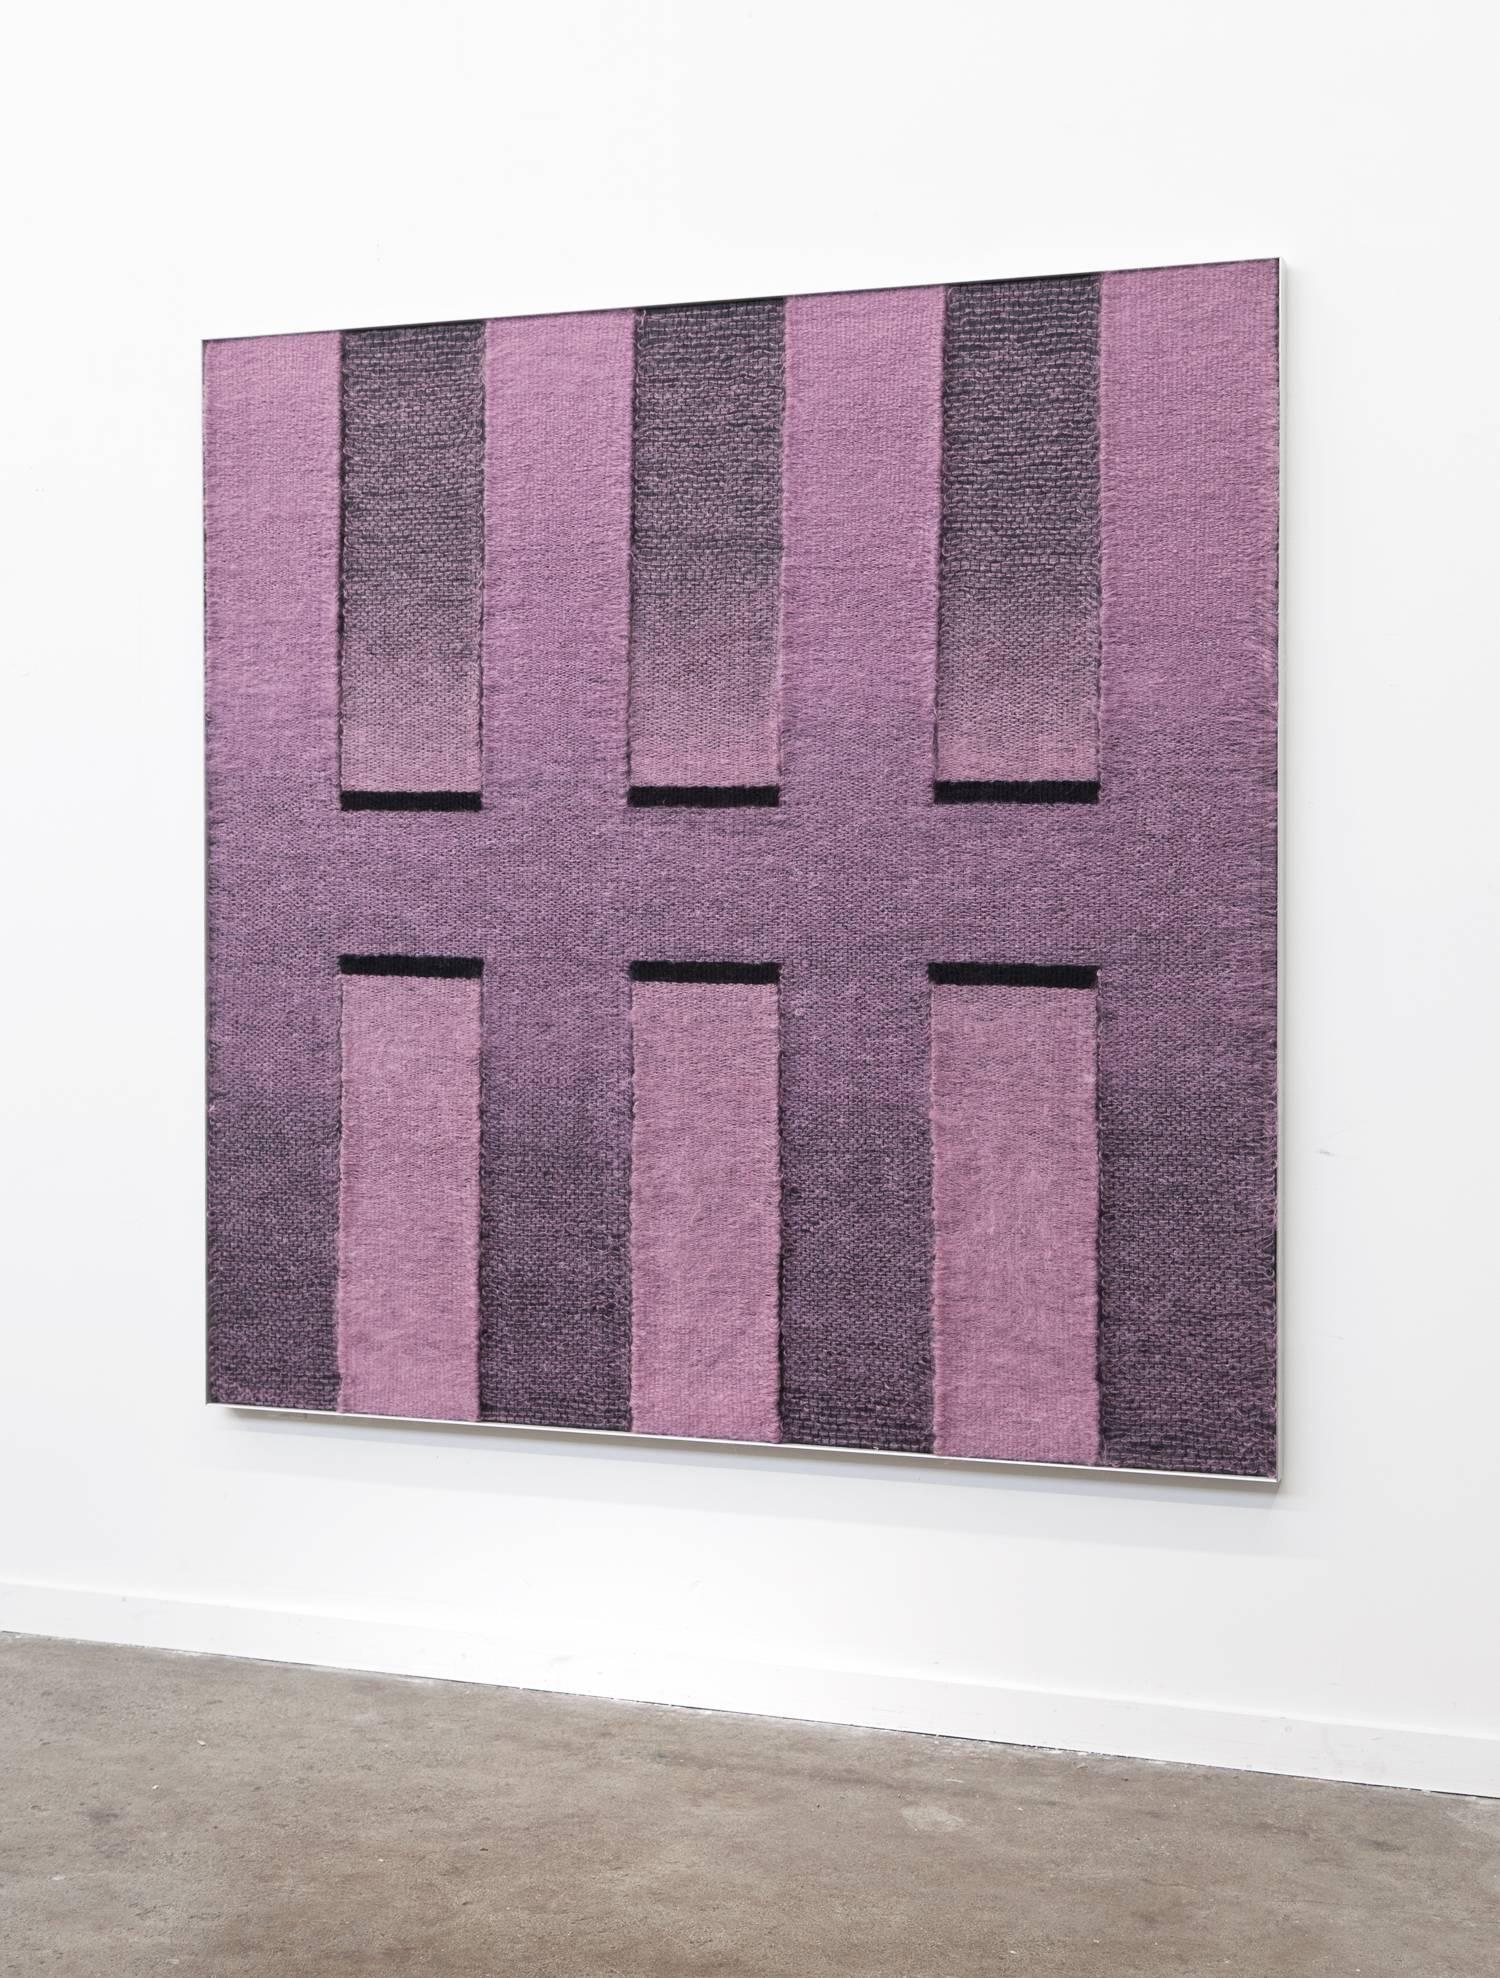 Pink to black rectangles
Measures: 68.5 ” x 68.5” x 2